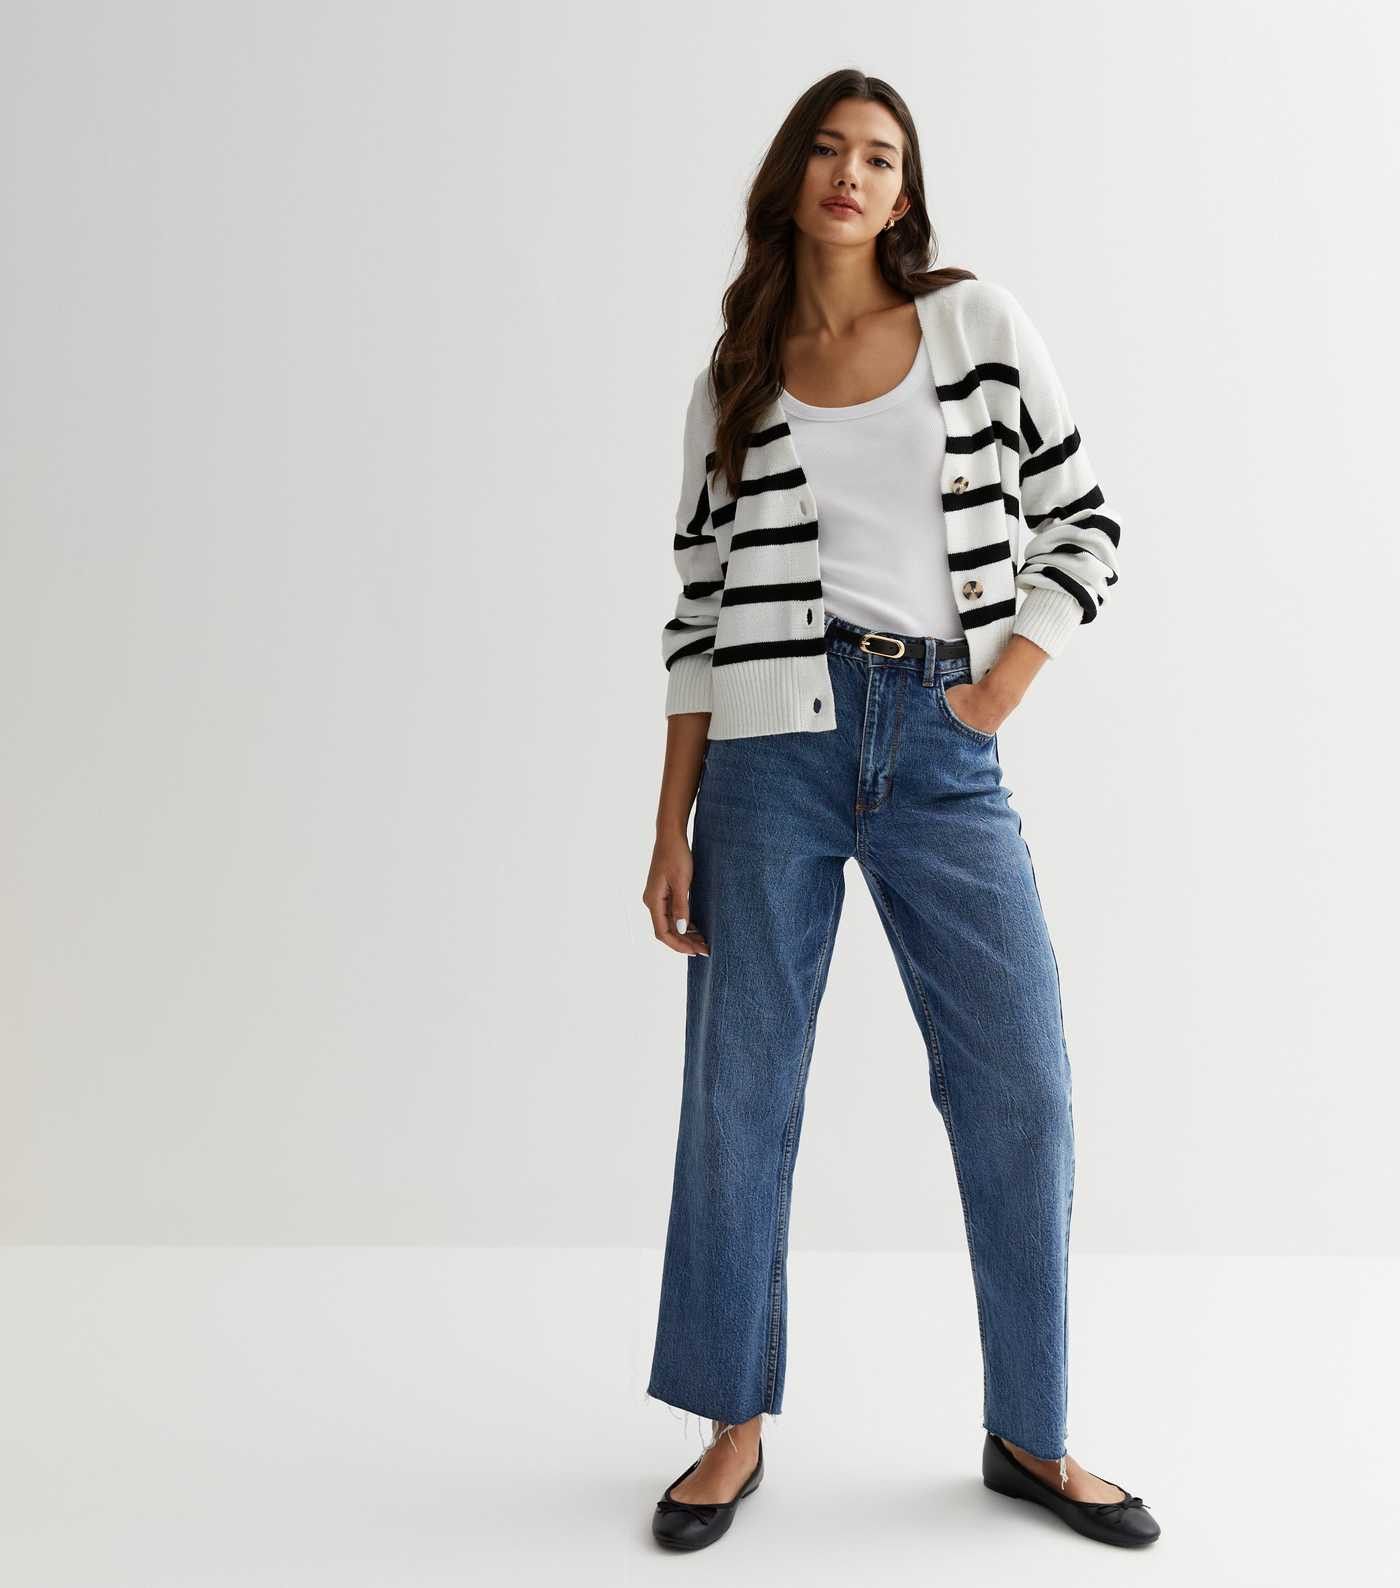 White Stripe Knit Cardigan
						
						Add to Saved Items
						Remove from Saved Items | New Look (UK)